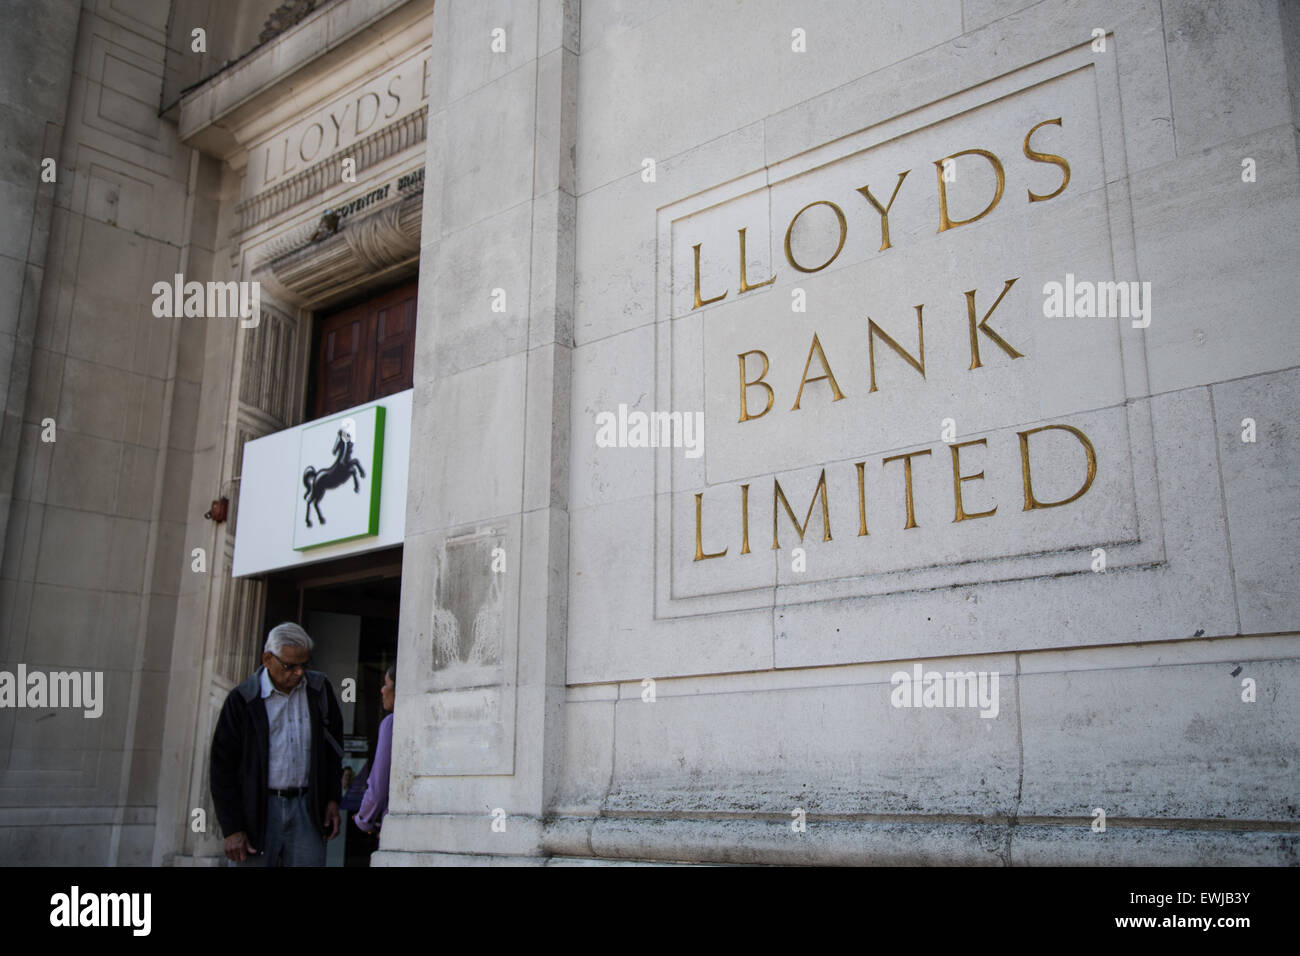 Exterior of Lloyds bank branch in Coventry city centre Stock Photo